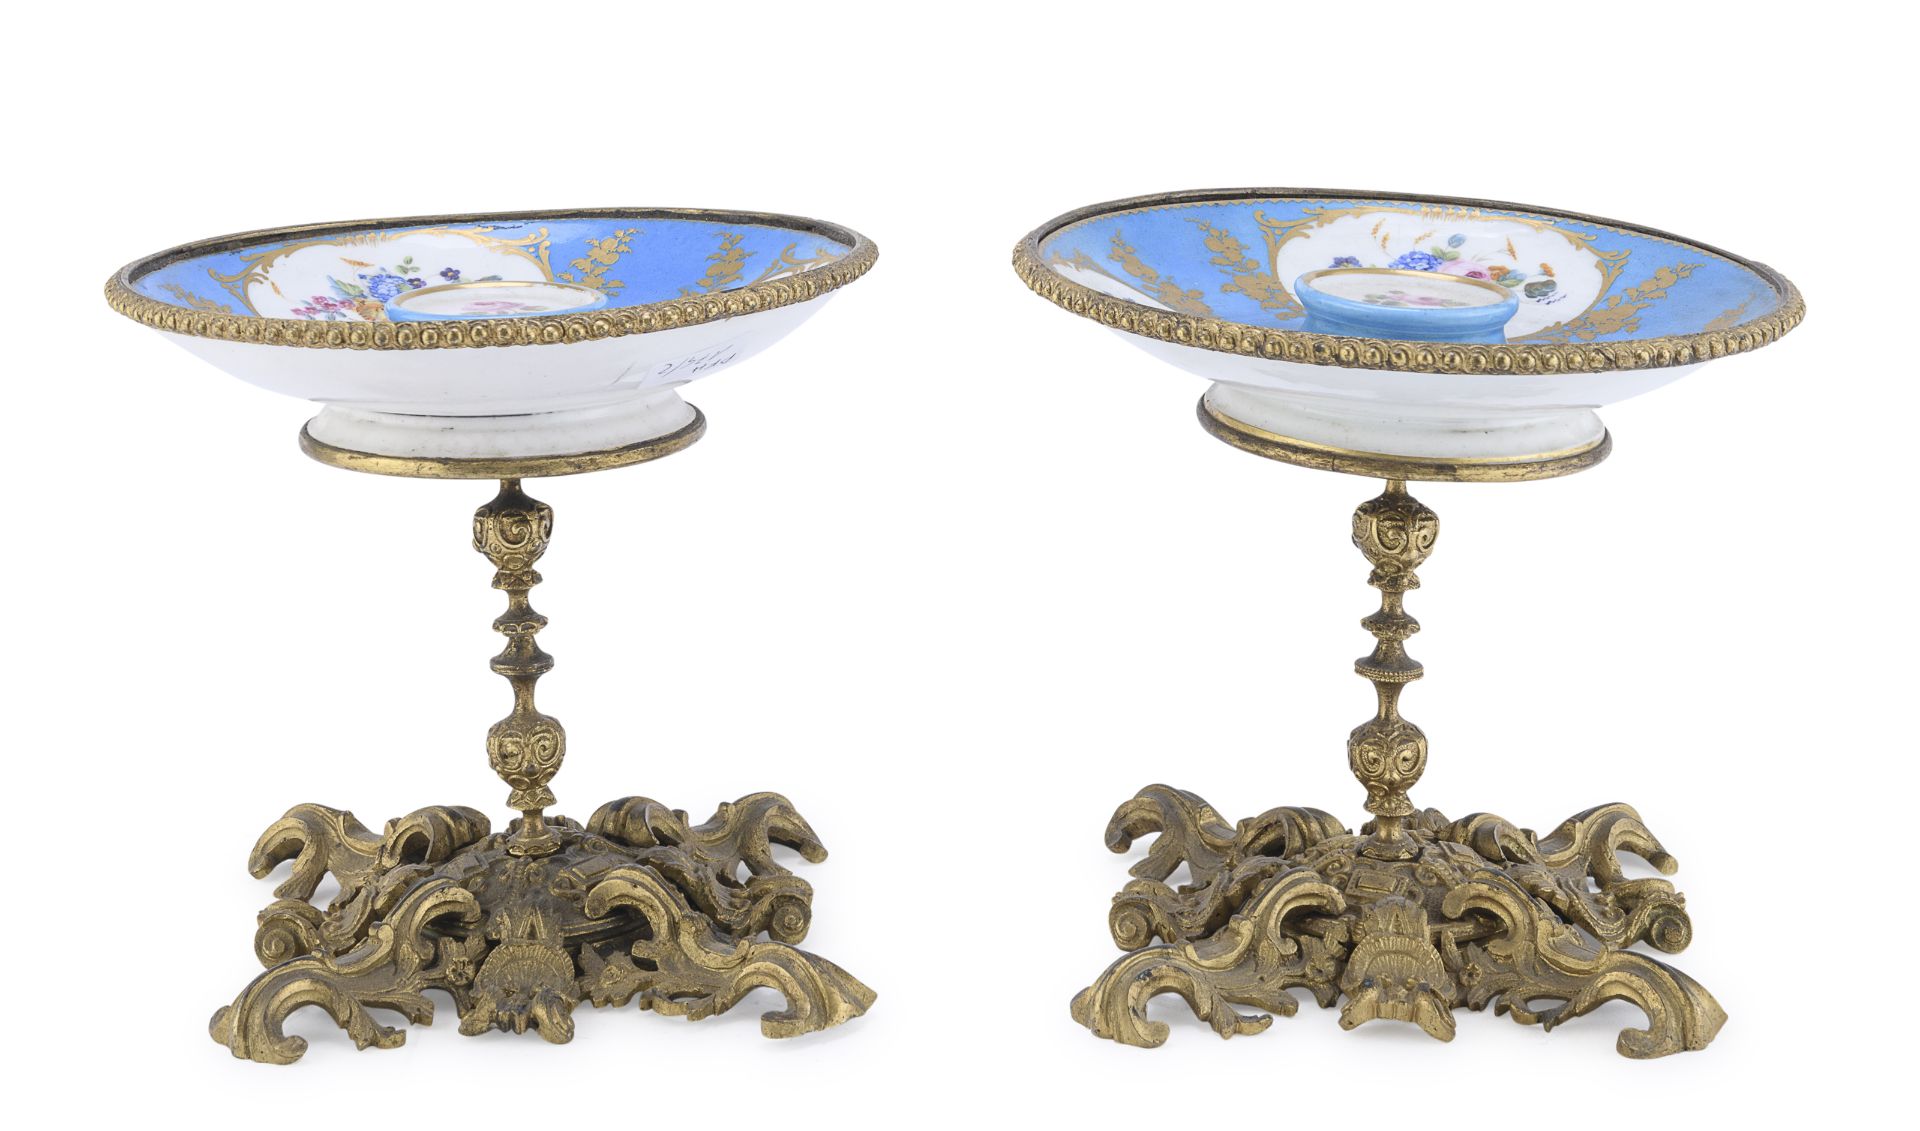 PAIR OF PORCELAIN STANDS PROBABLY SEVRES 19th CENTURY